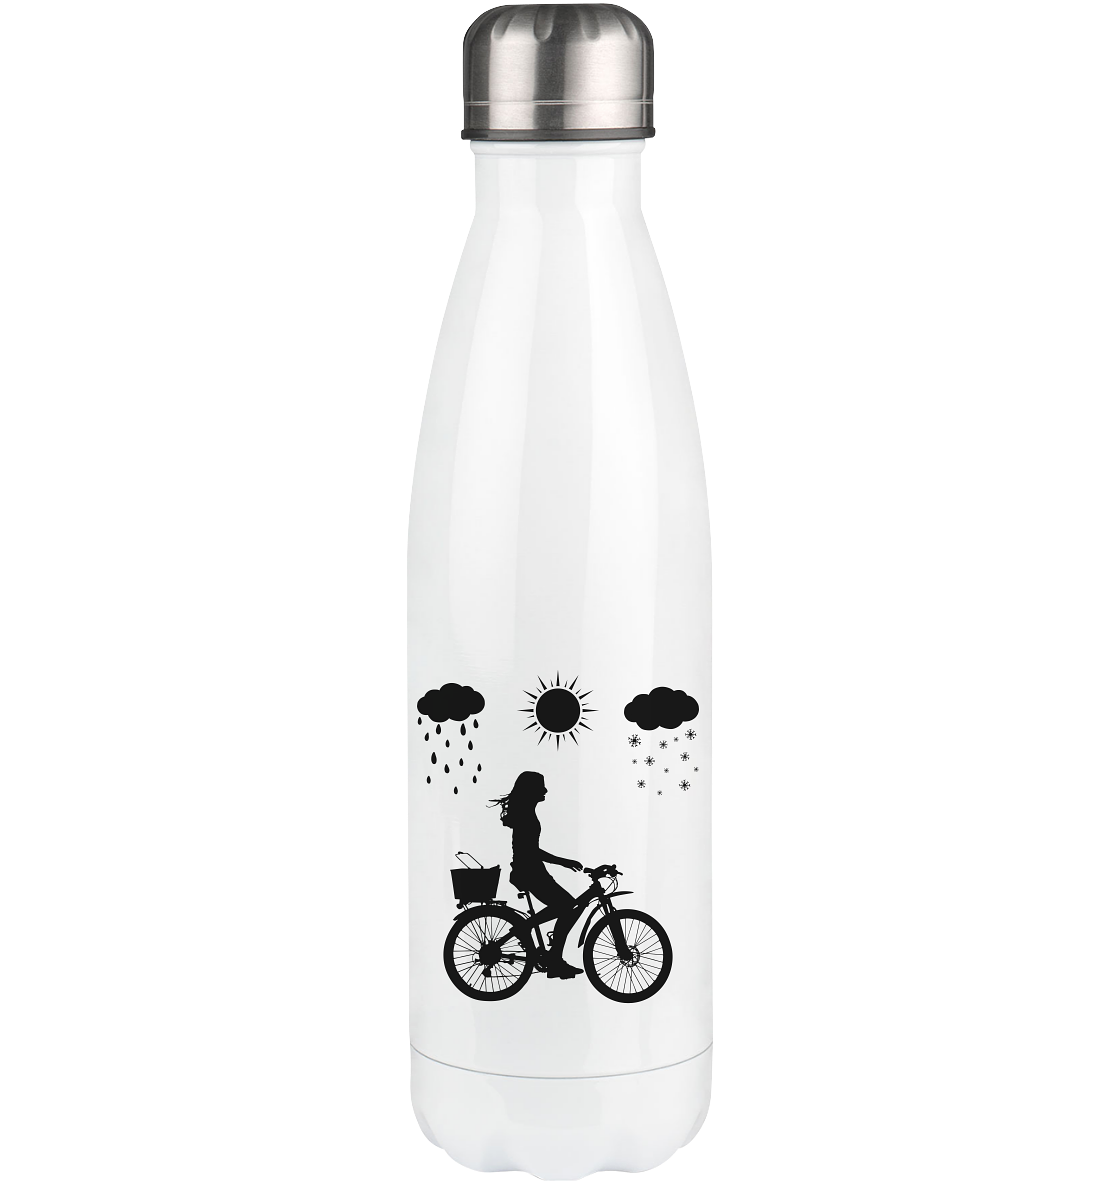 All Seasons and Cycling - Edelstahl Thermosflasche fahrrad 500ml